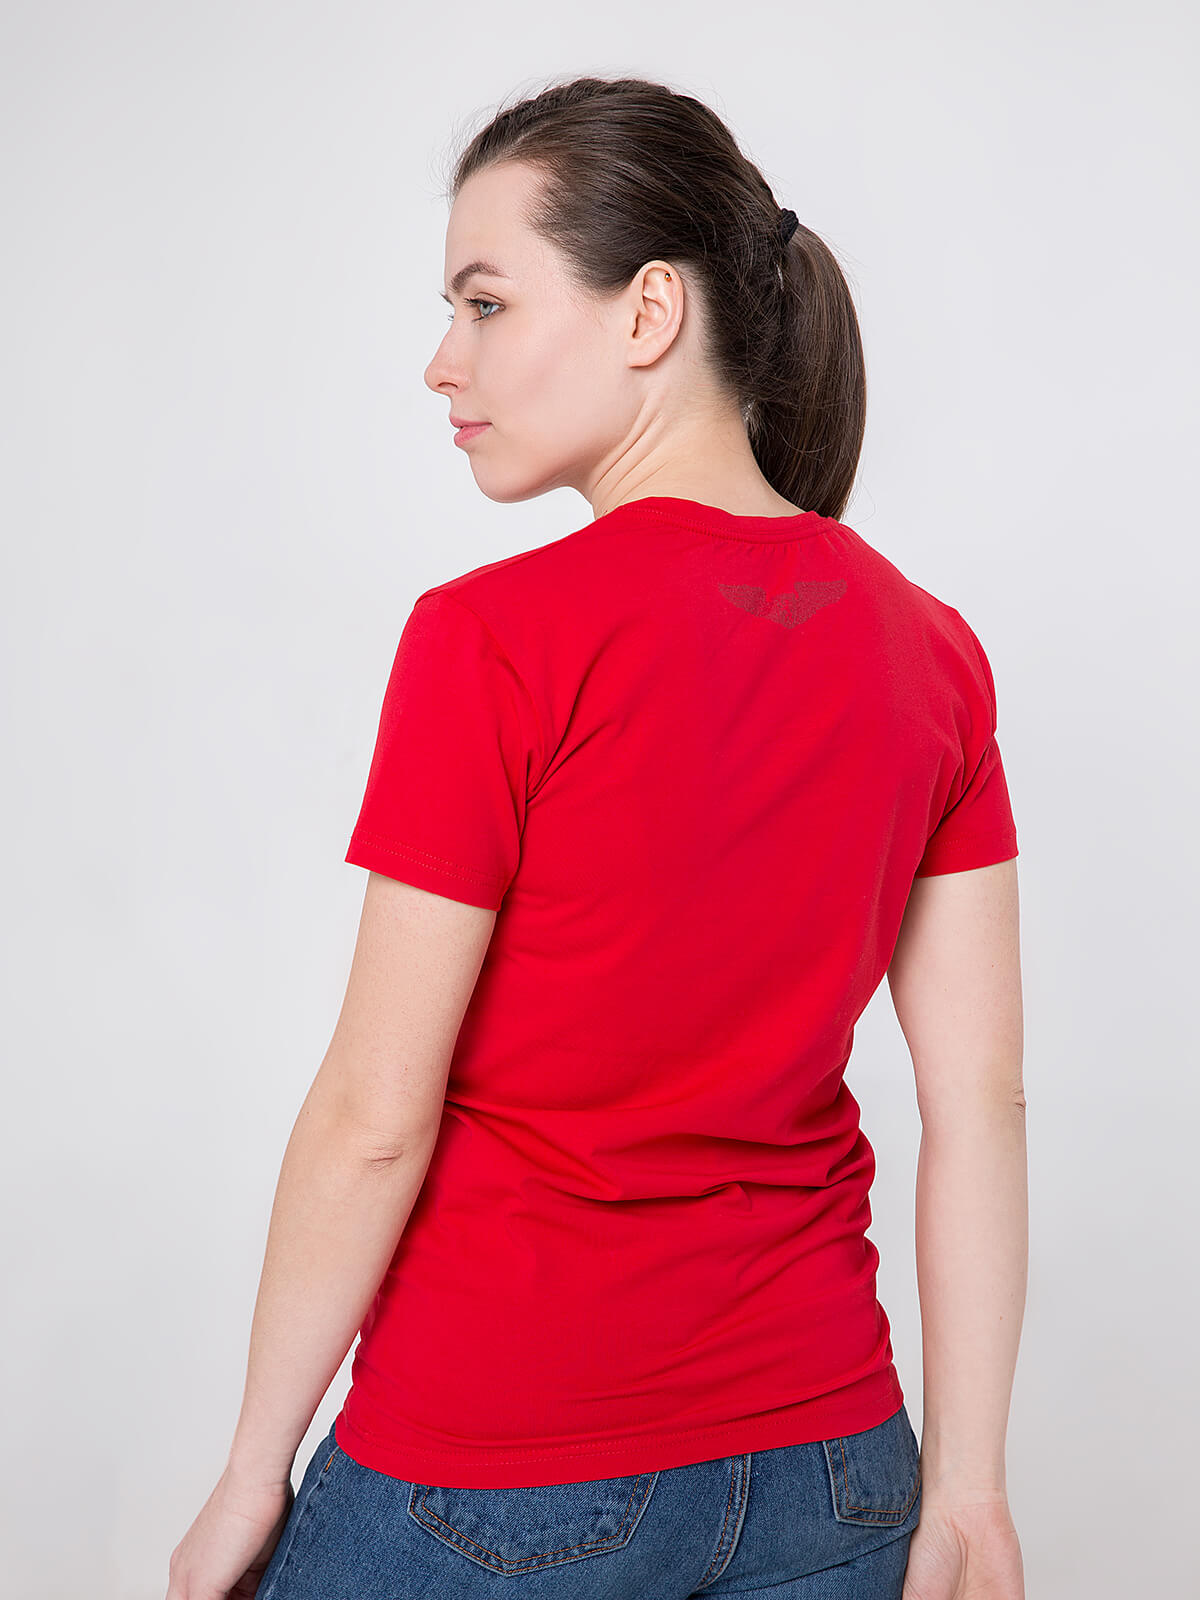 Women's T-Shirt Born To Fly. Color red.  Don’t worry about the universal size.